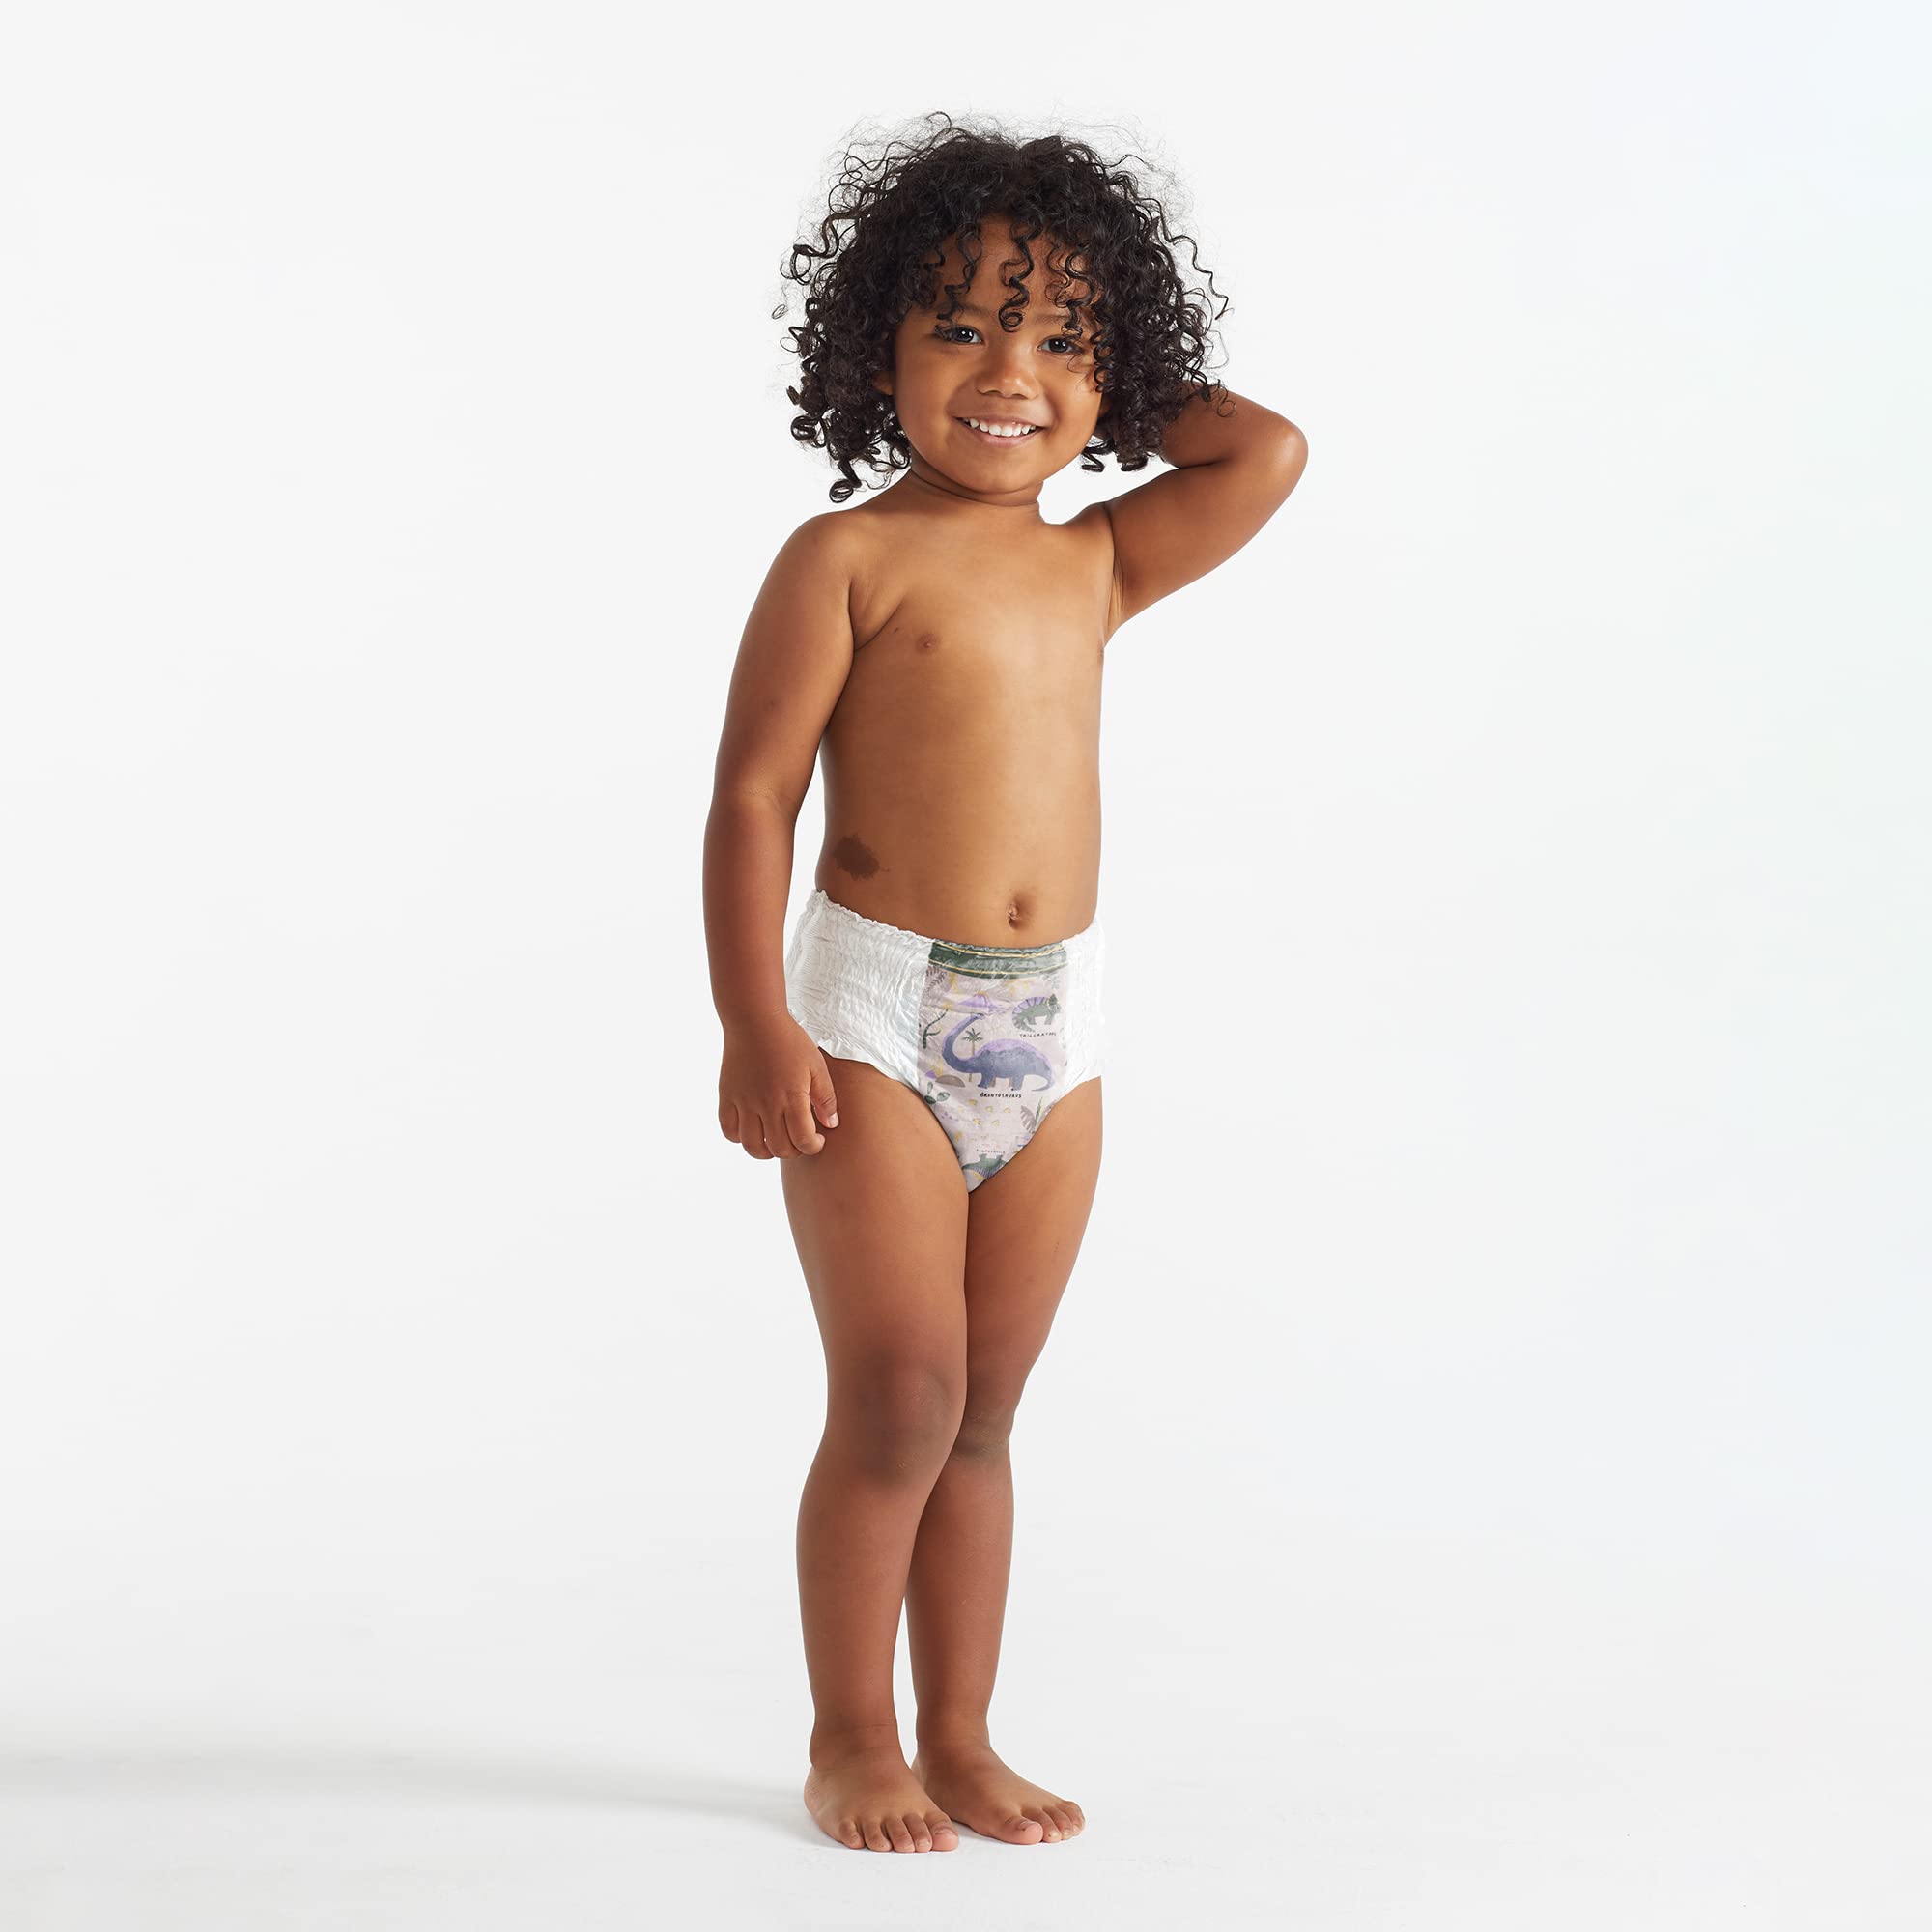 The Honest Company Clean Conscious Training Pants | Plant-Based, Sustainable Diapers | Rompin' & Stompin' + Diggin' It | Size 3T/4T (32-40 lbs), 69 Count